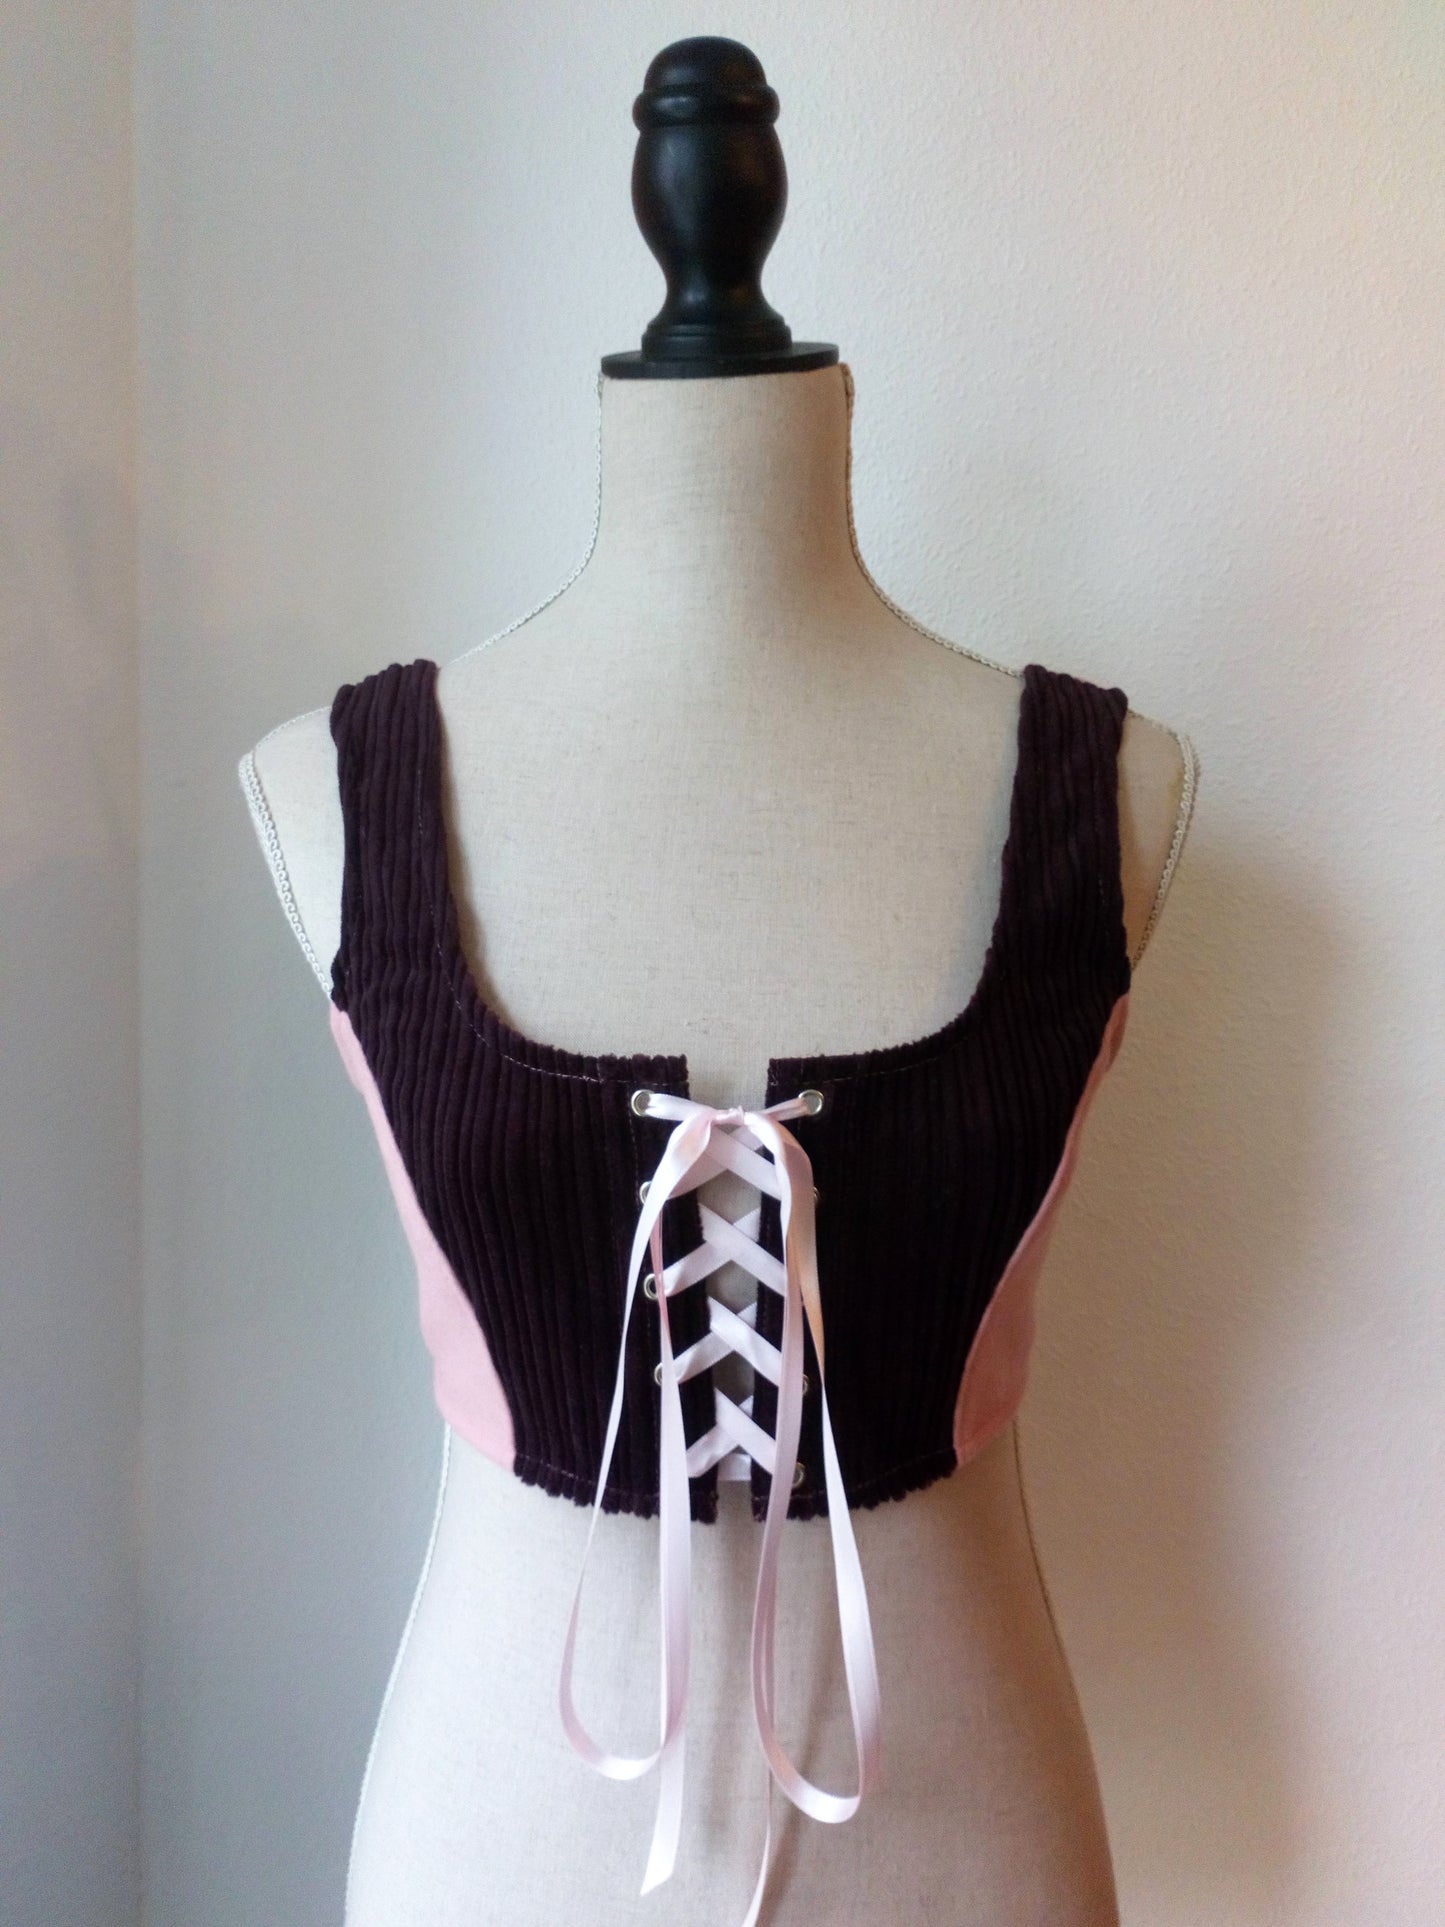 Medieval style short corset